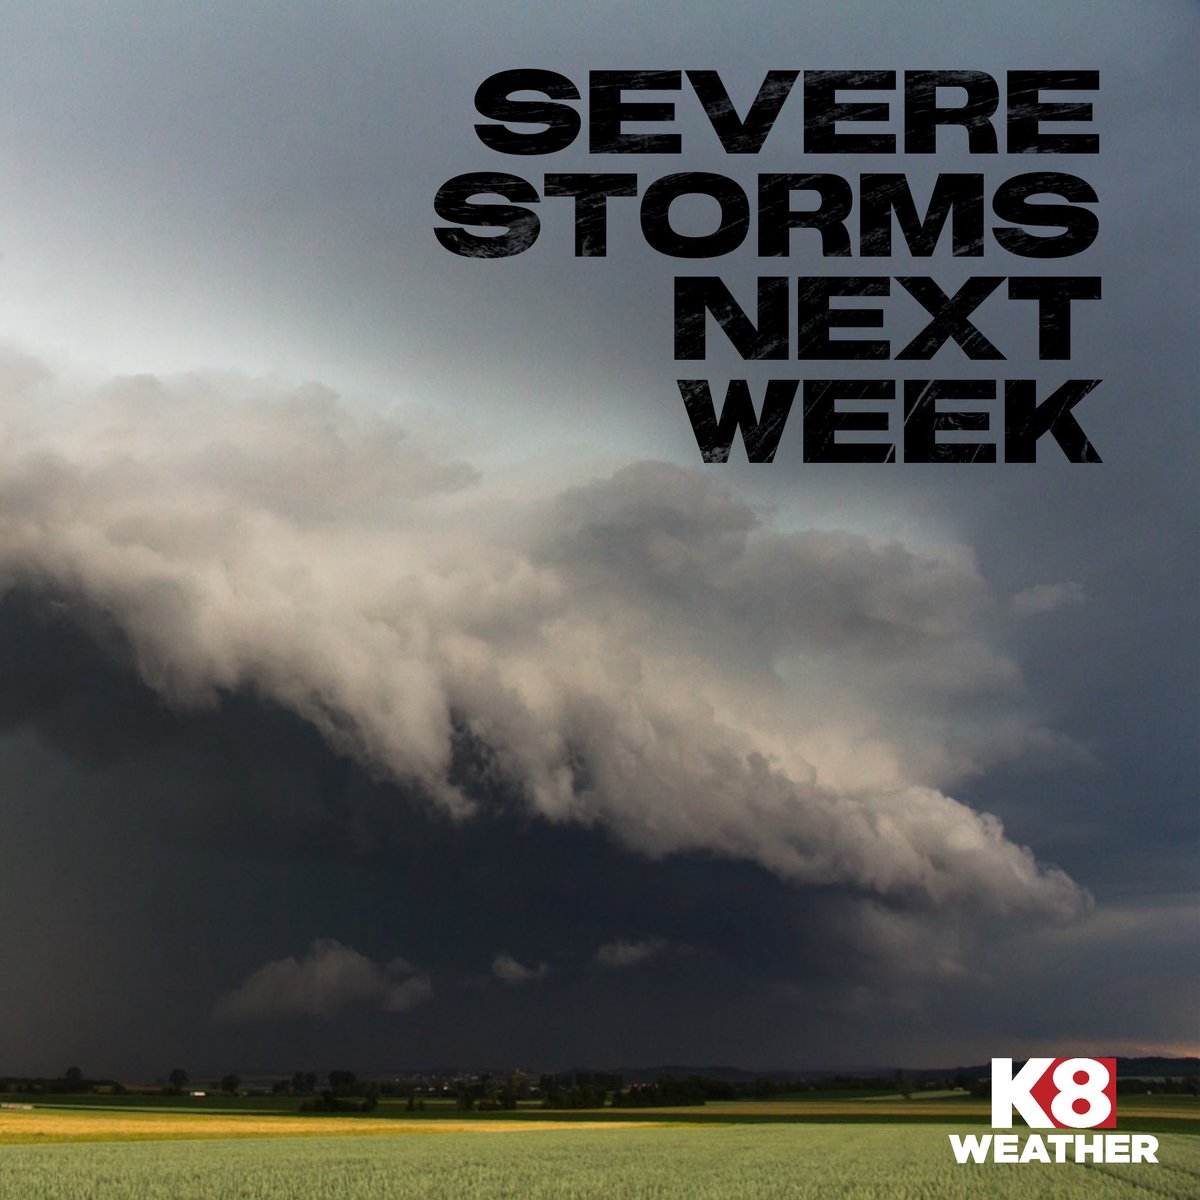 As we go into next week, more storms are expected, but with a much more unstable environment. At this time, we are most concerned with Tuesday and Wednesday. Large hail appears to be the main threat. Don’t cancel anything, but be weather aware. We will keep you updated.